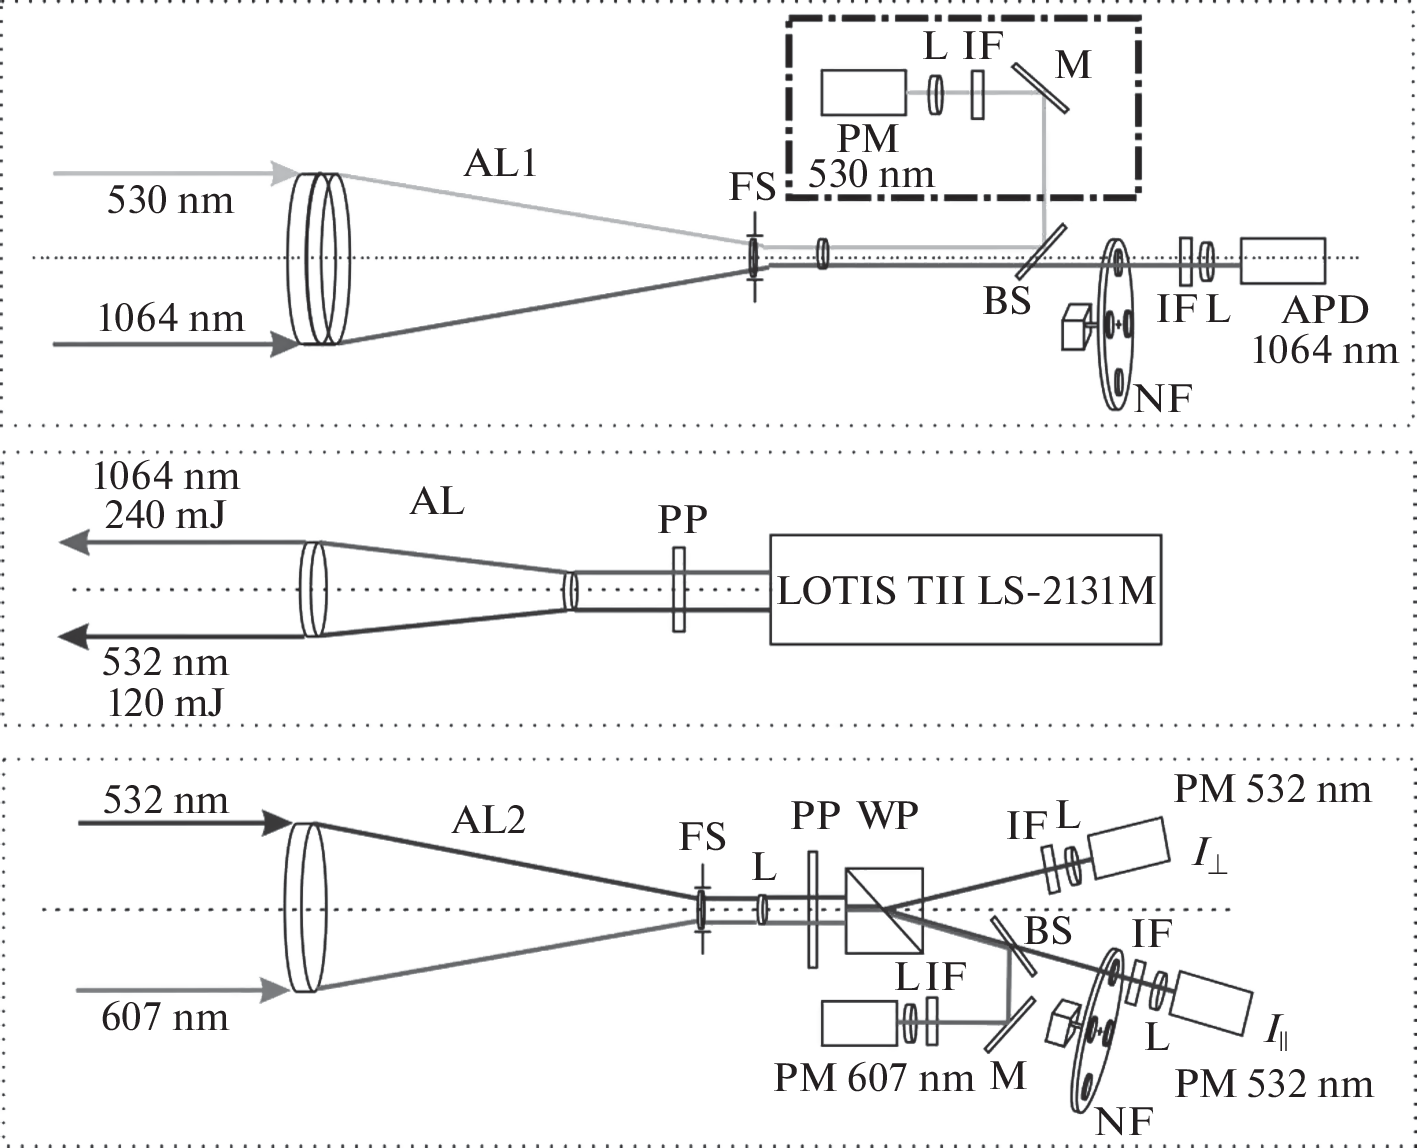 Modernization of the LOZA-A2 Lidar for Simultaneous Measurements of Vibrational-Rotational and Purely Rotational Raman Spectra